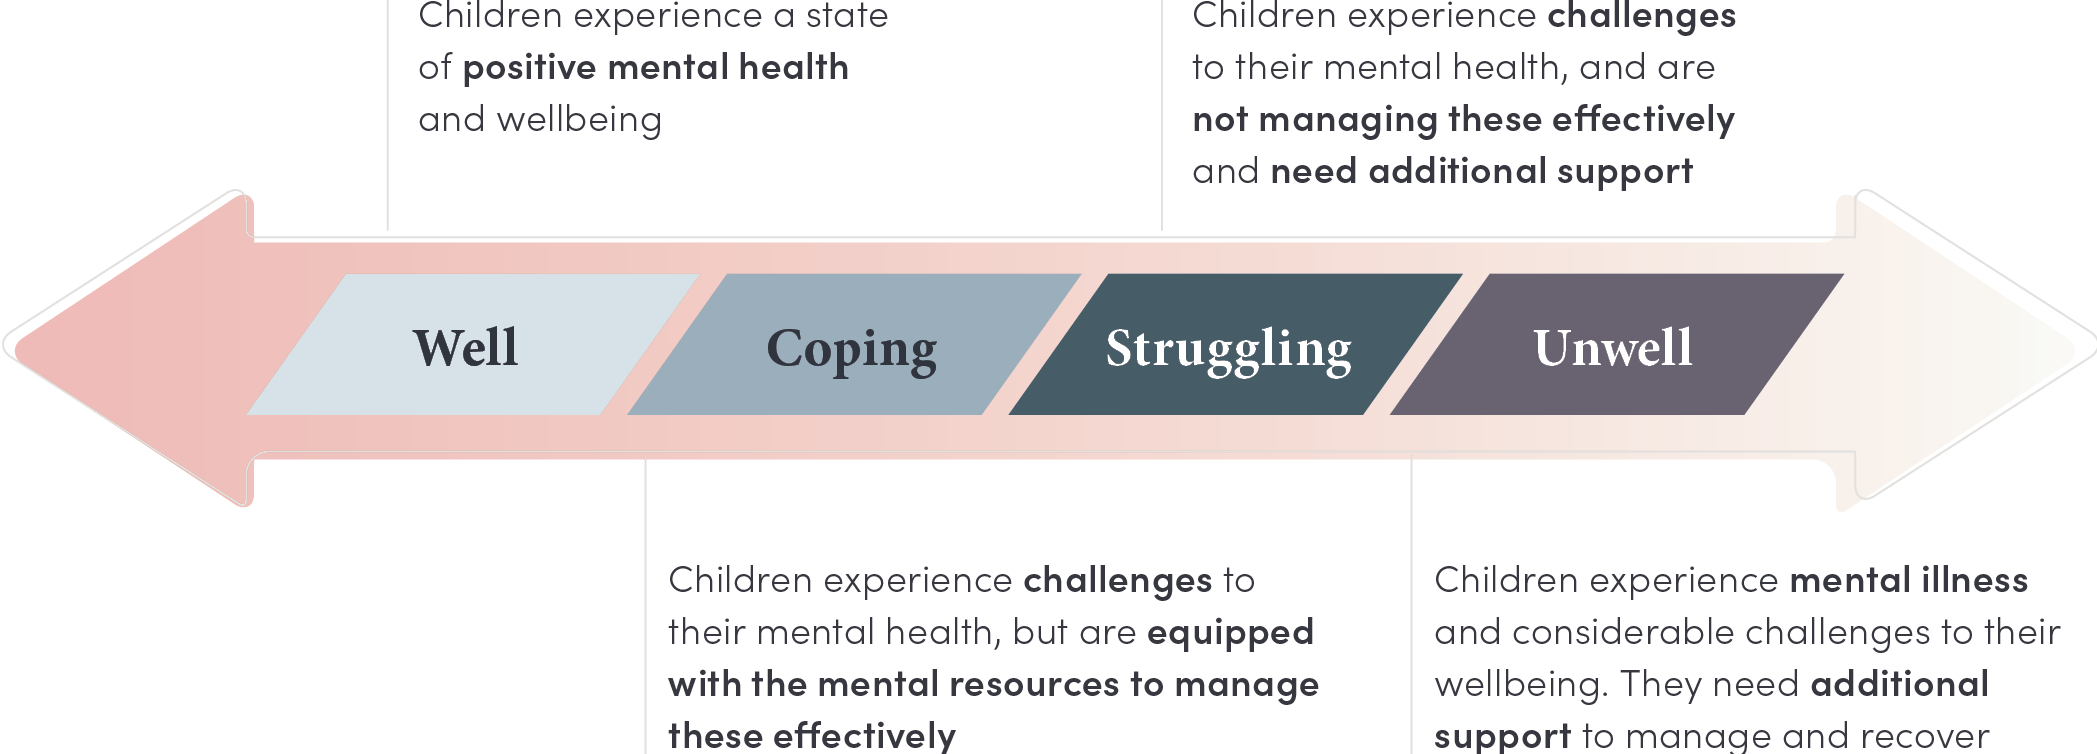 A spectrum showing four categories of wellbeing from well to unwell. Well - children experience a state of positive mental health and wellbeing. Coping - children experience challenges to their mental health, but are equipped with the mental resources to manage these effectively. Struggling - children experience challenges to their mental health, and are not managing these effectively and need additional support. Unwell - children experience mental illness and considerable challenges to their wellbeing. They need additional support to manage and recover.